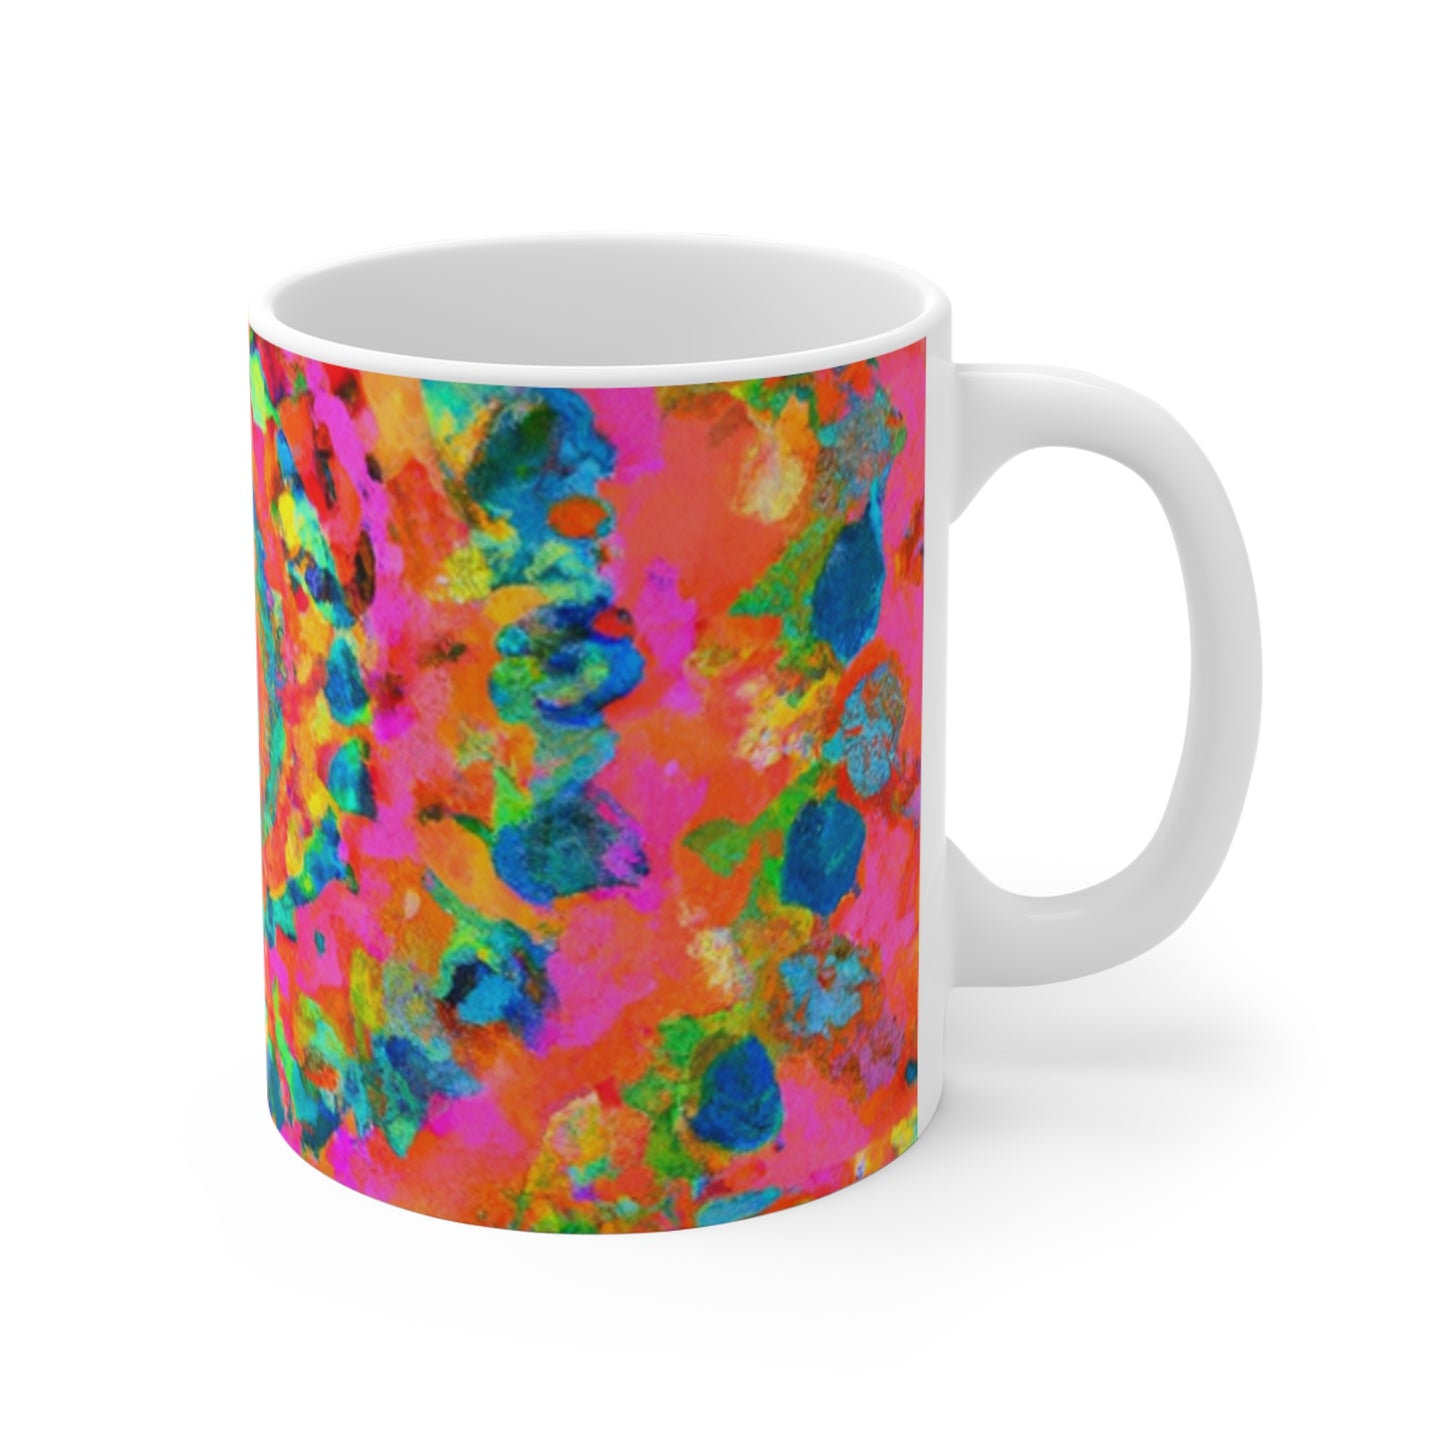 Brew Master Edna. - Psychedelic Coffee Cup Mug 11 Ounce